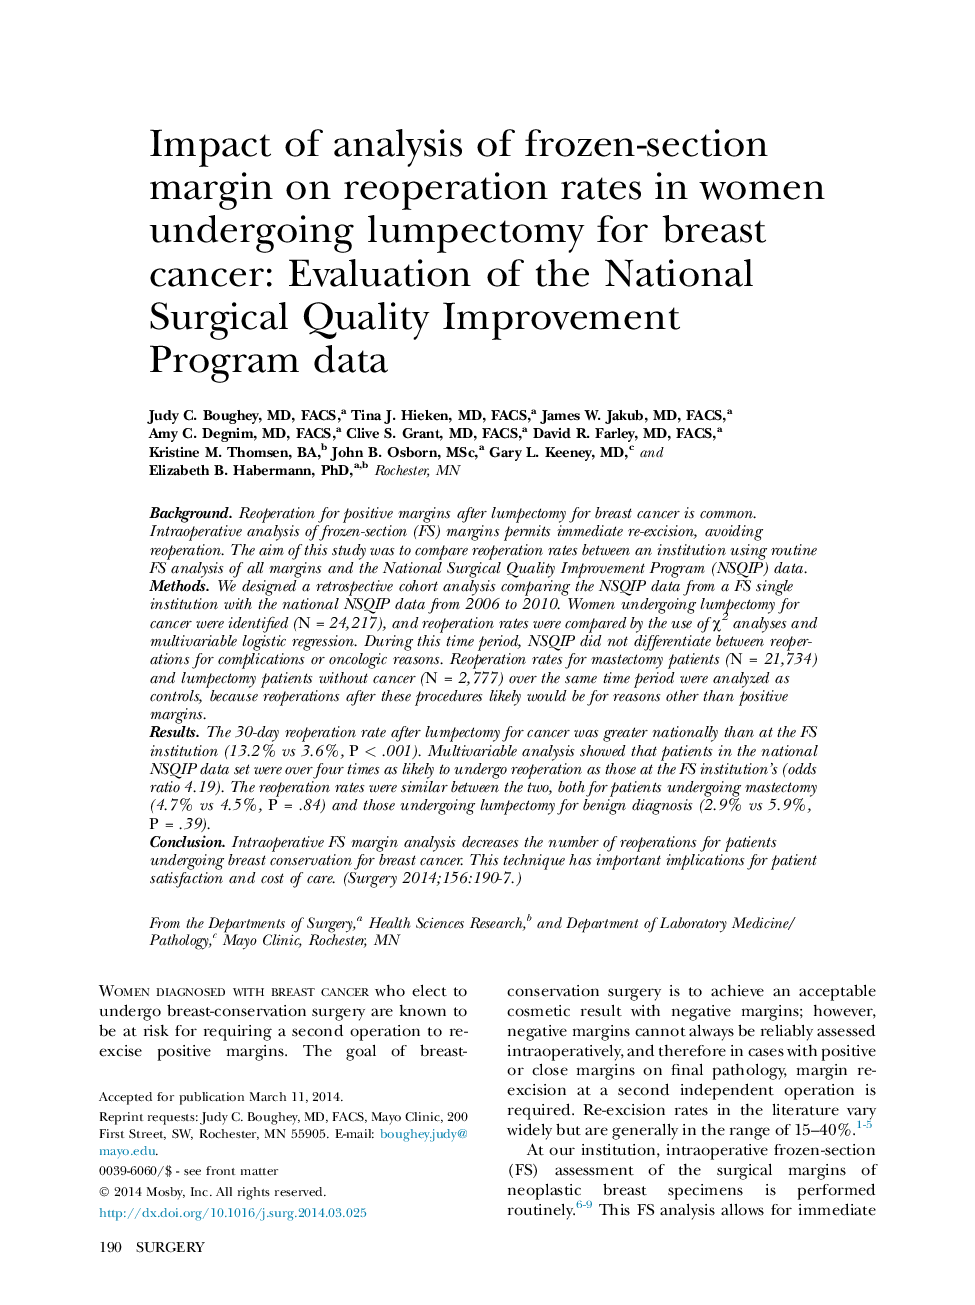 Impact of analysis of frozen-section margin on reoperation rates in women undergoing lumpectomy for breast cancer: Evaluation of the National Surgical Quality Improvement Program data